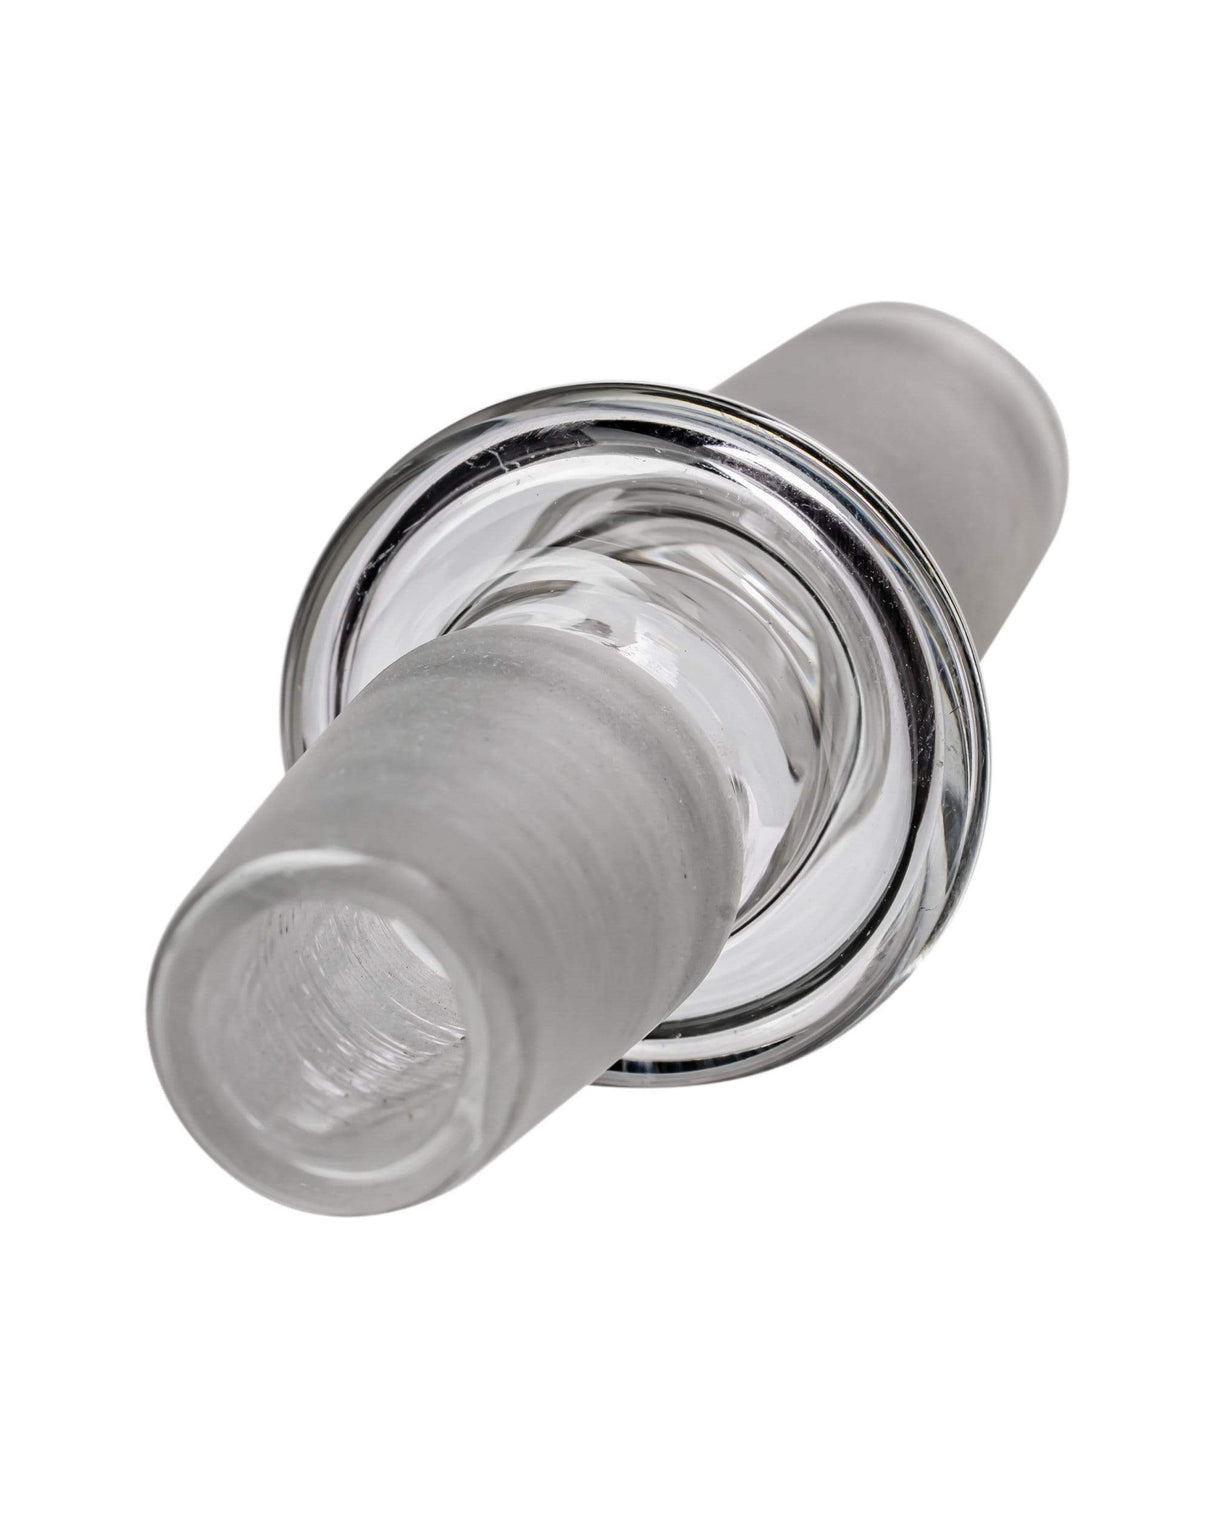 GRAV Male to Male Joint Adapter, Clear Borosilicate Glass, 18mm to 14mm, Angled View